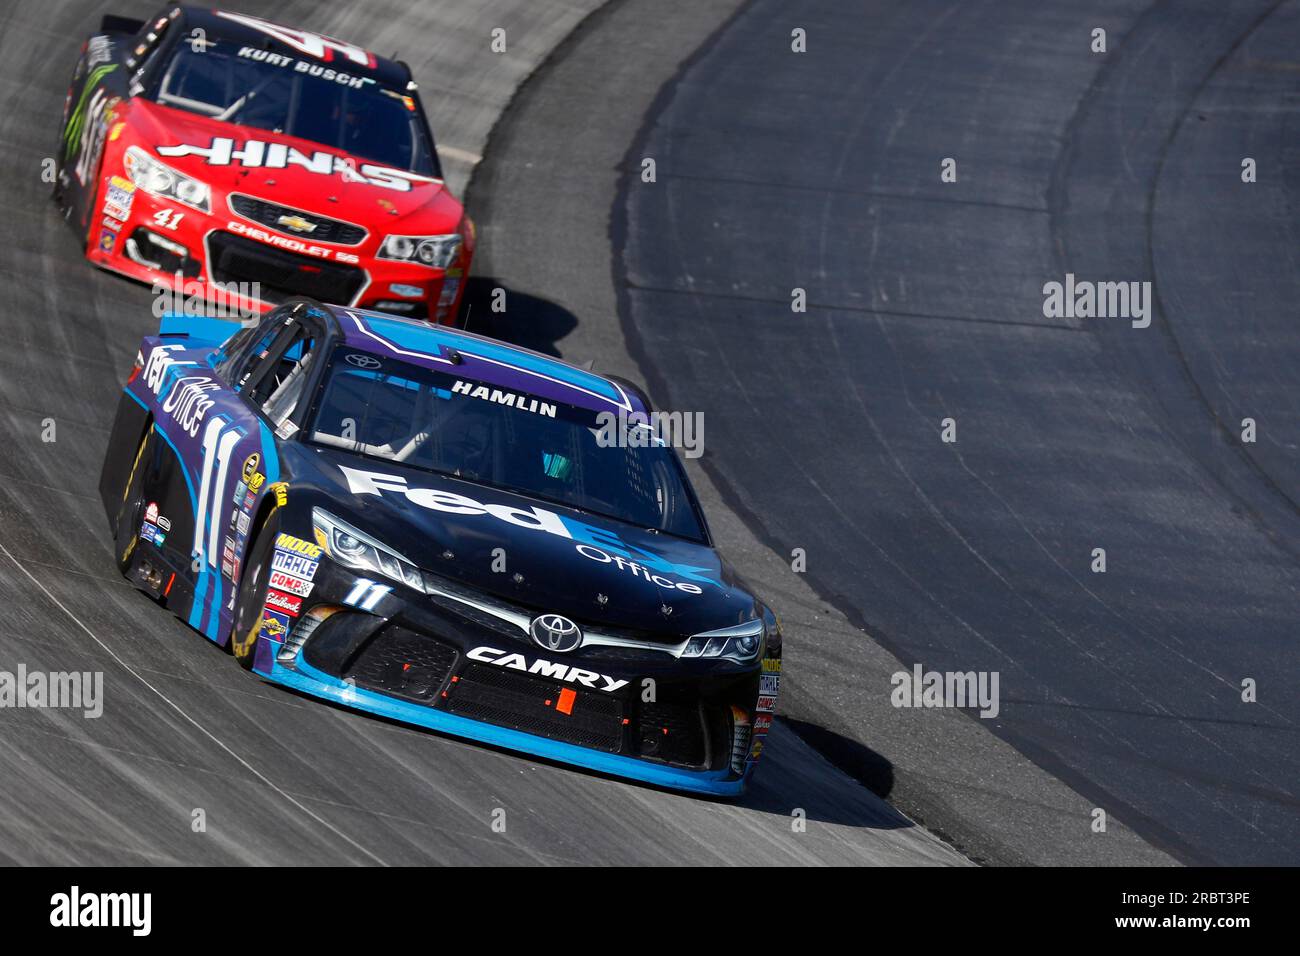 Dover, DE, May 15, 2016: Denny Hamlin (11) brings his race car through the turns during the AAA 400 Benefiting Autism Speaks at the Dover Stock Photo